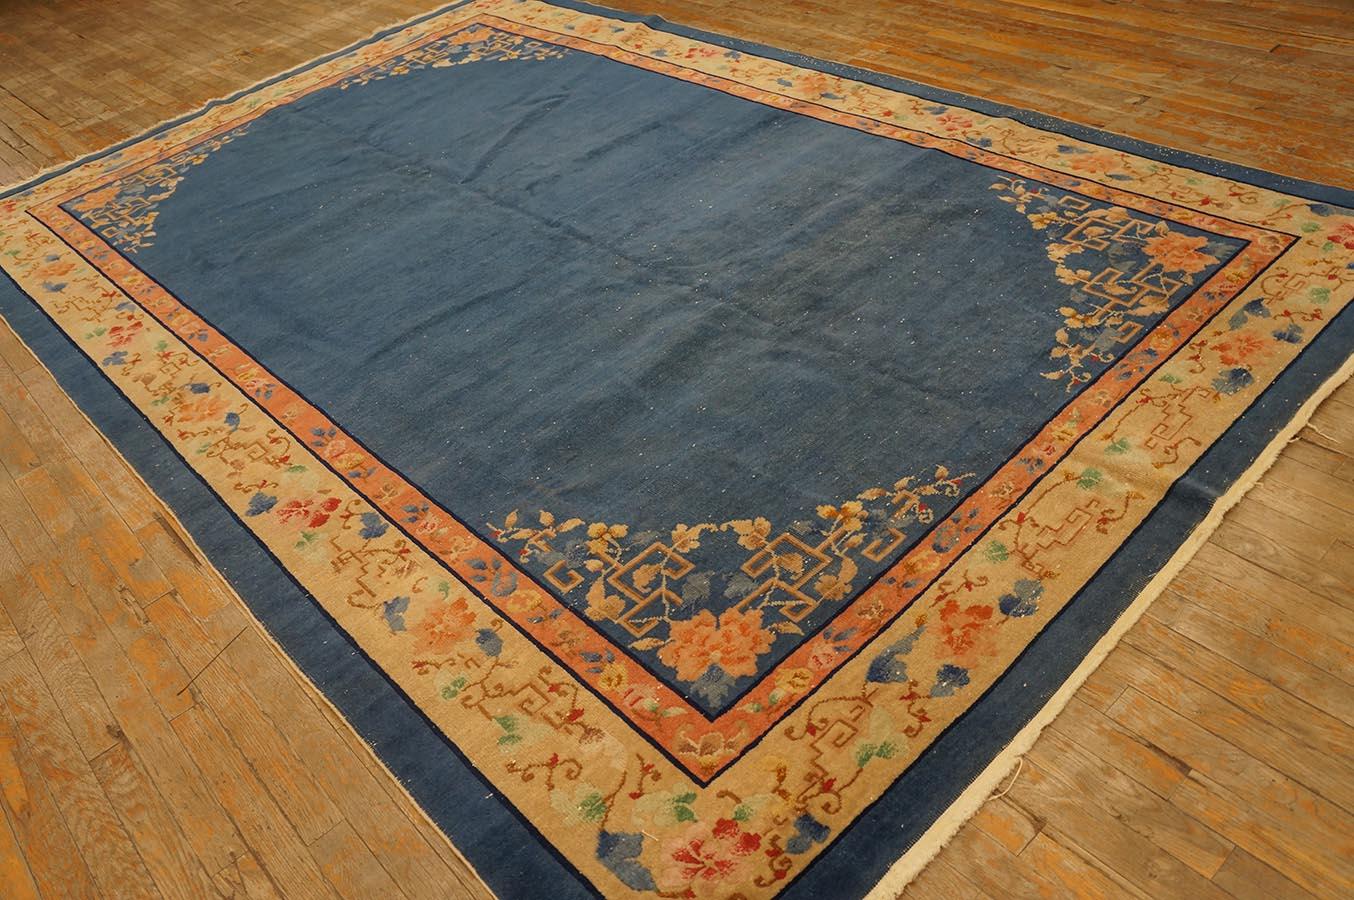 Early 20th Century 1920s Chinese Art Deco Carpet ( 6'9